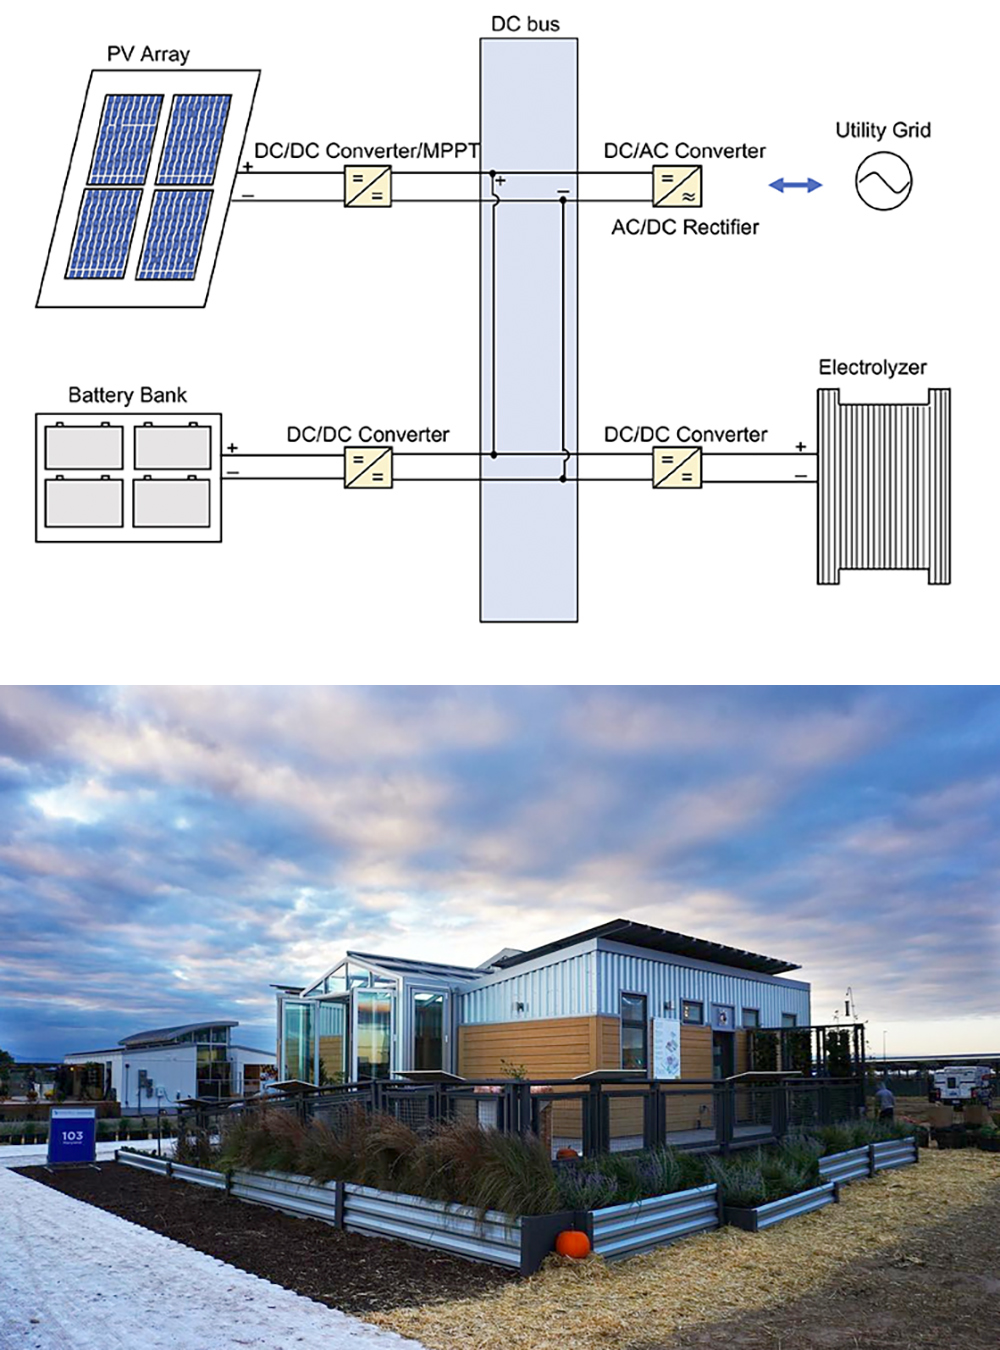 Above: Figure 1 from the paper. A schematic diagram of the coupled system.
Below: ReACTHouse, the University of Maryland's 2017 Solar Decathlon entry, on site in Colorado.